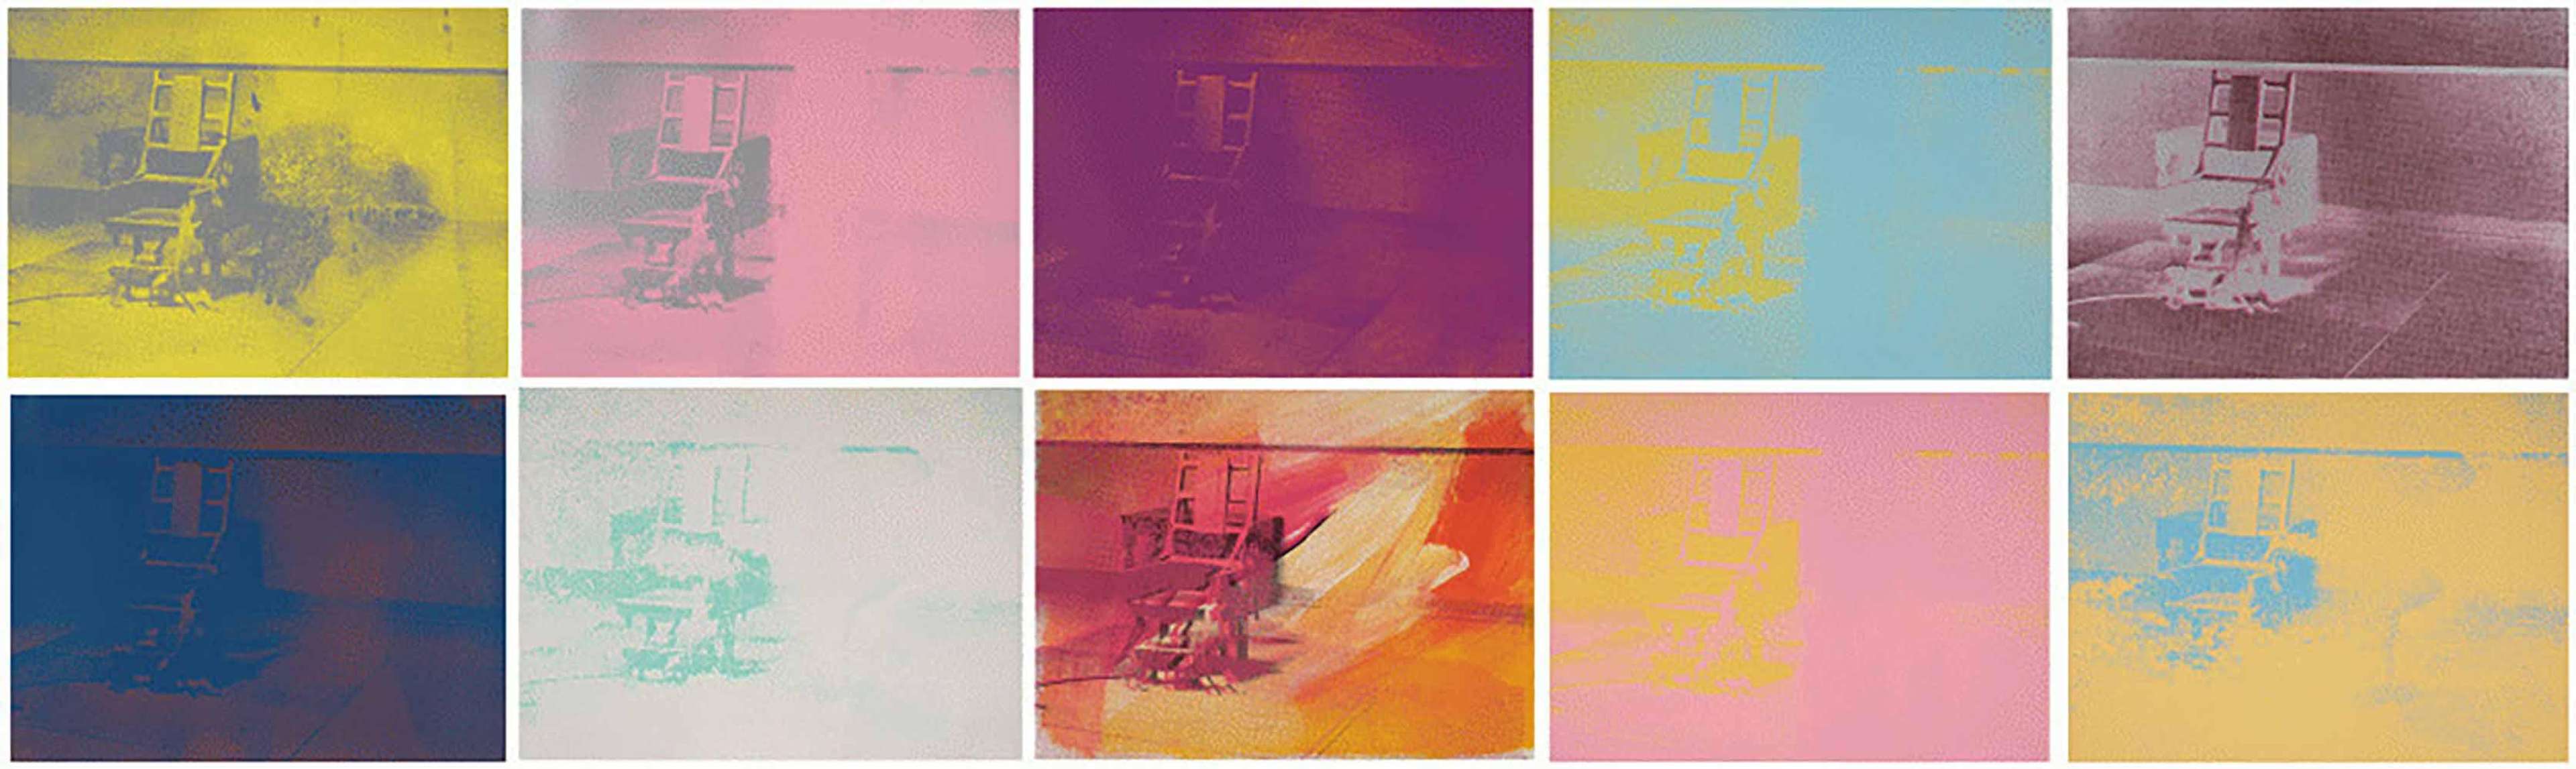 A complete set of Andy Warhol's Electric Chair prints. It shows a single electric chair in the centre of an empty room